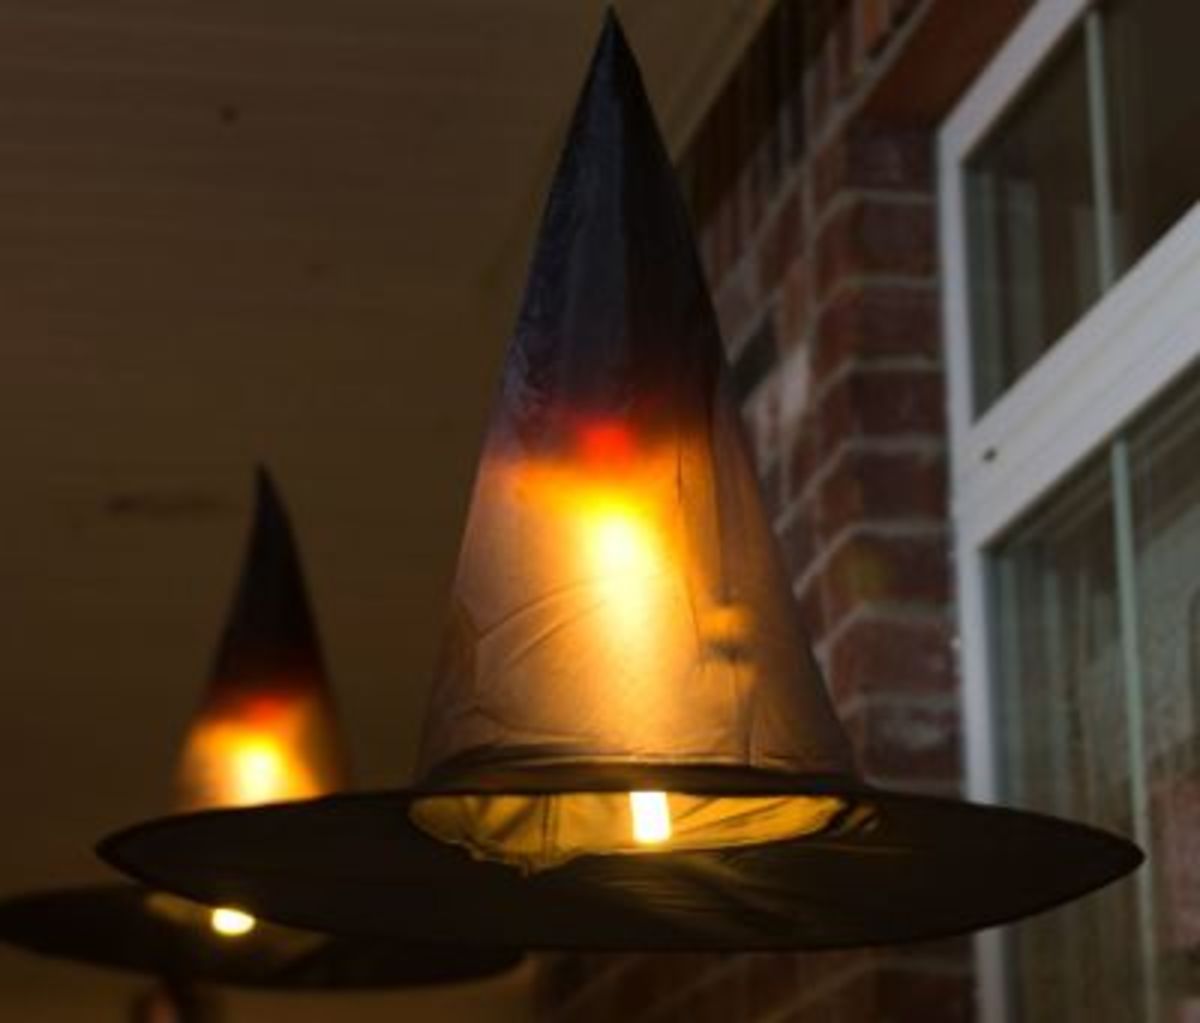 Another idea for a pretty-yet-creepy luminary is a glowing witch's hat!